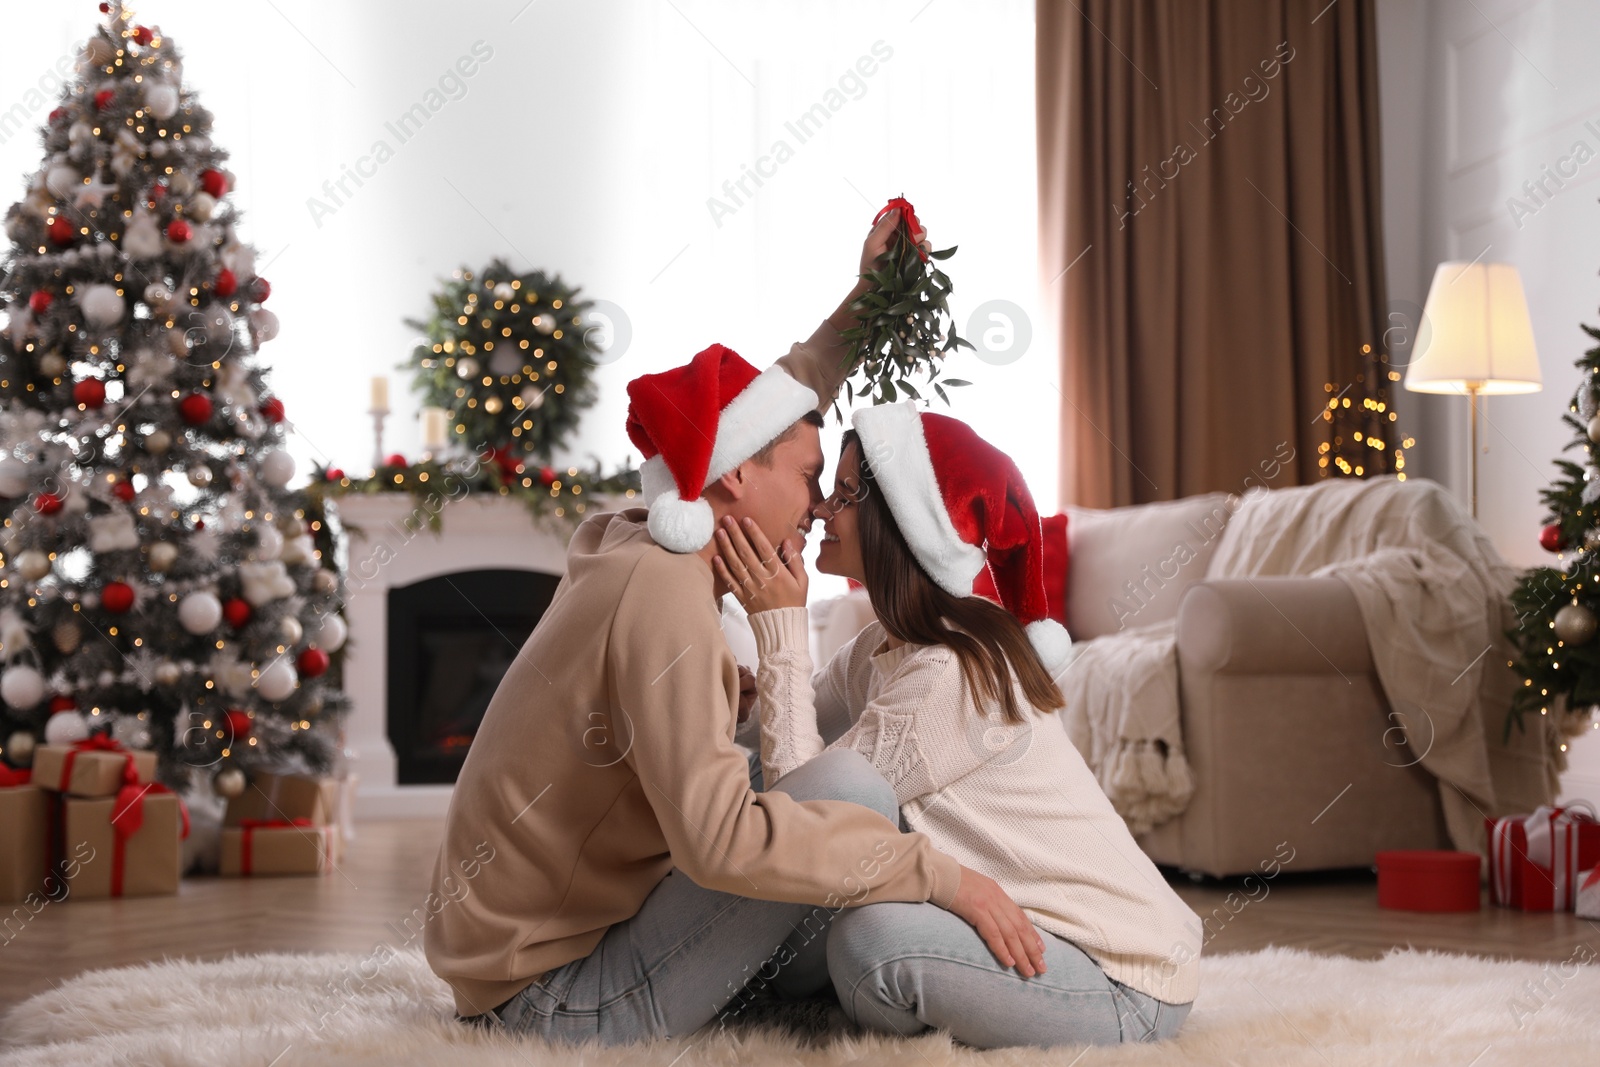 Photo of Couple kissing under mistletoe in room decorated for Christmas